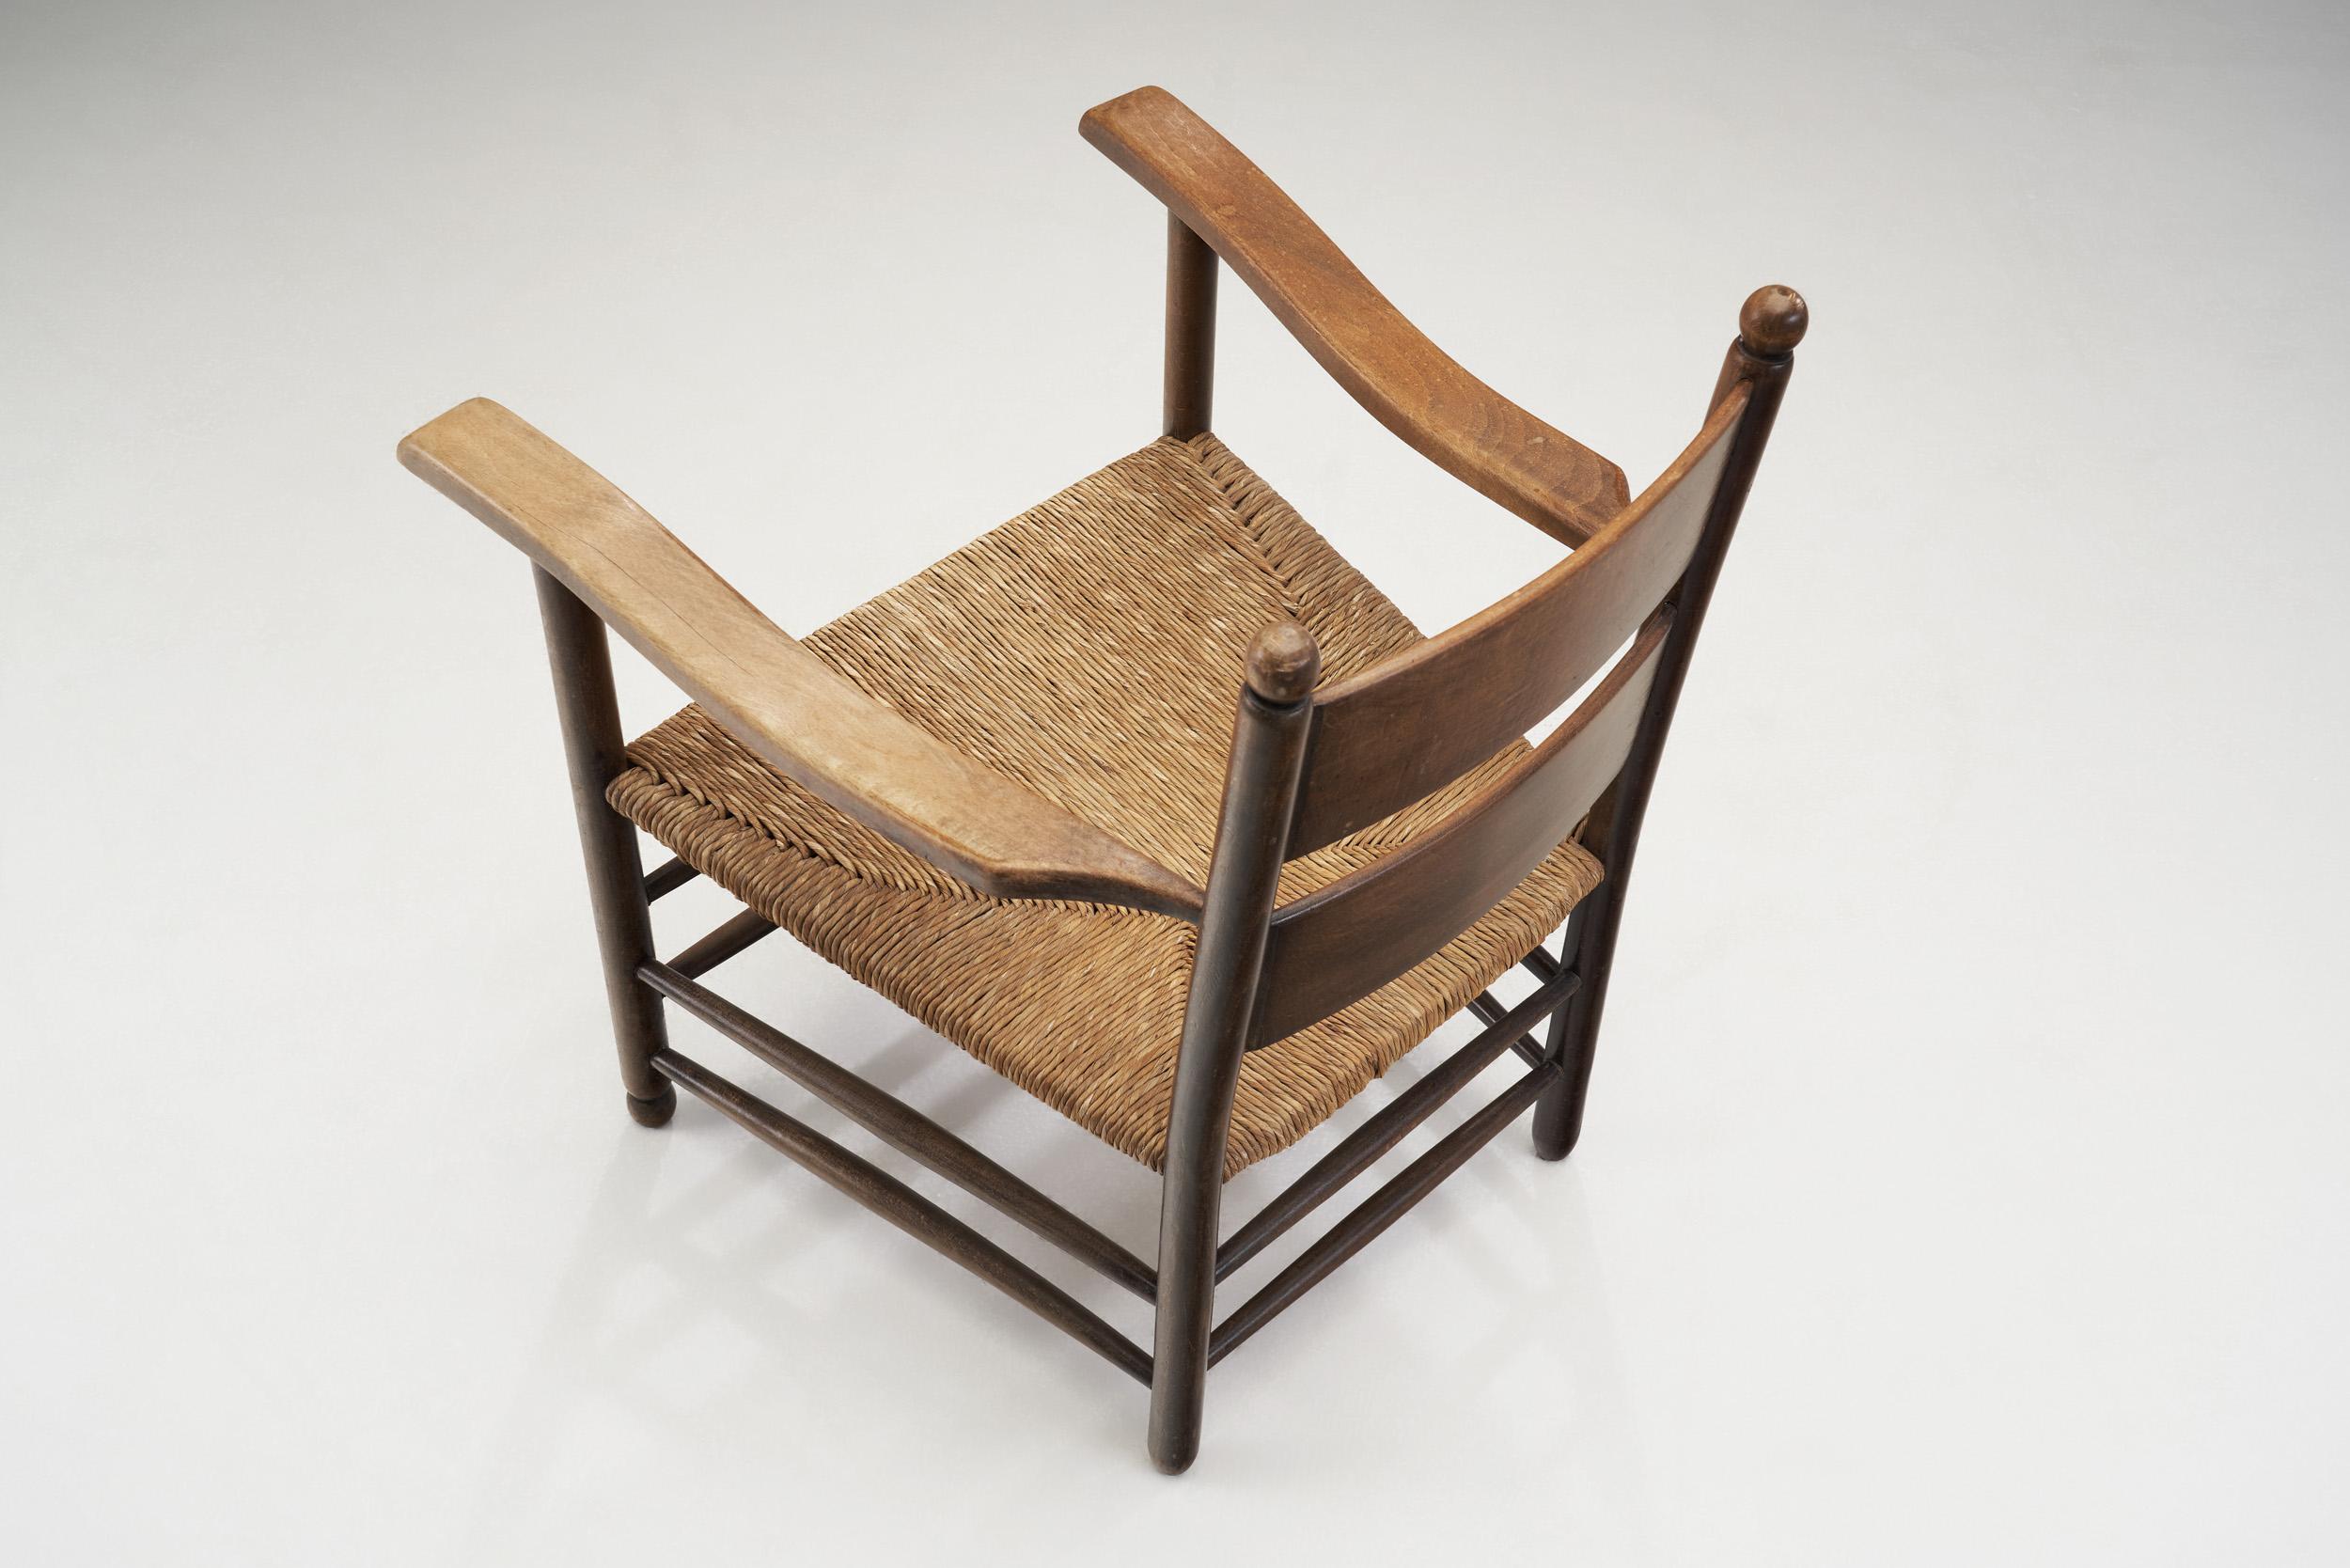 European Modernist Oak and Straw Armchairs, Europe, 1960s For Sale 1